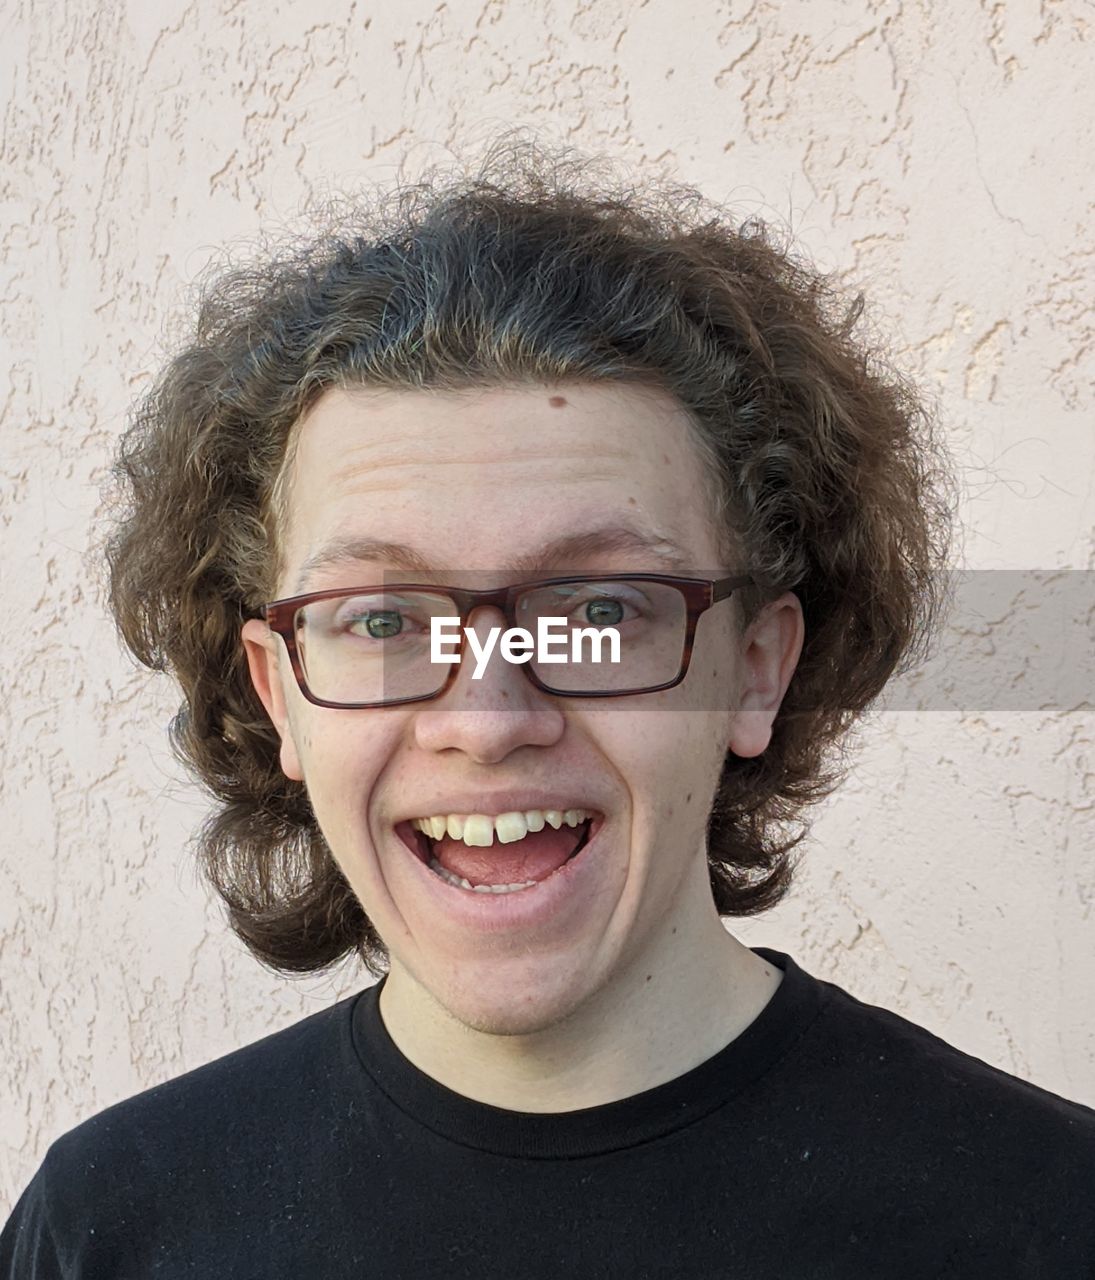 Portrait of smiling teenage boy with curly hair and glasses against wall